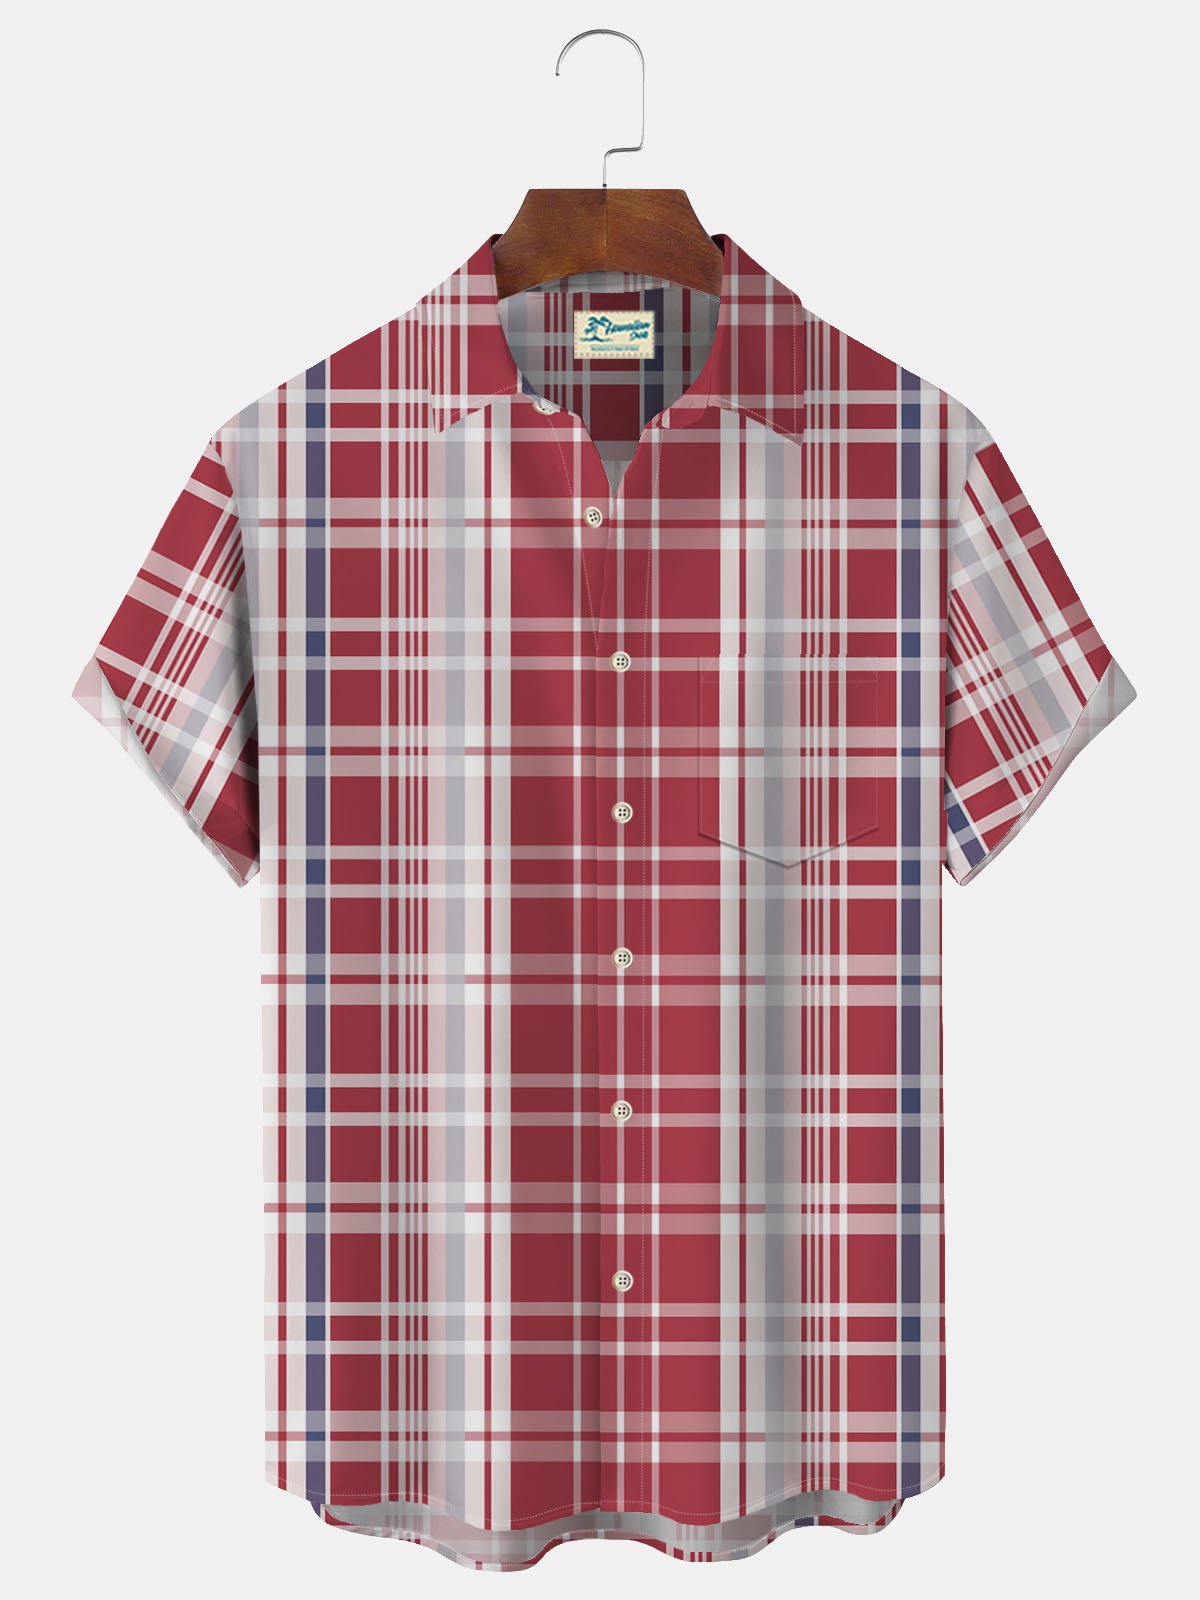 Royaura Retro Casual Men's Red Plaid Shirts Wrinkle Free Seersucker Outdoor Camp Button Shirts